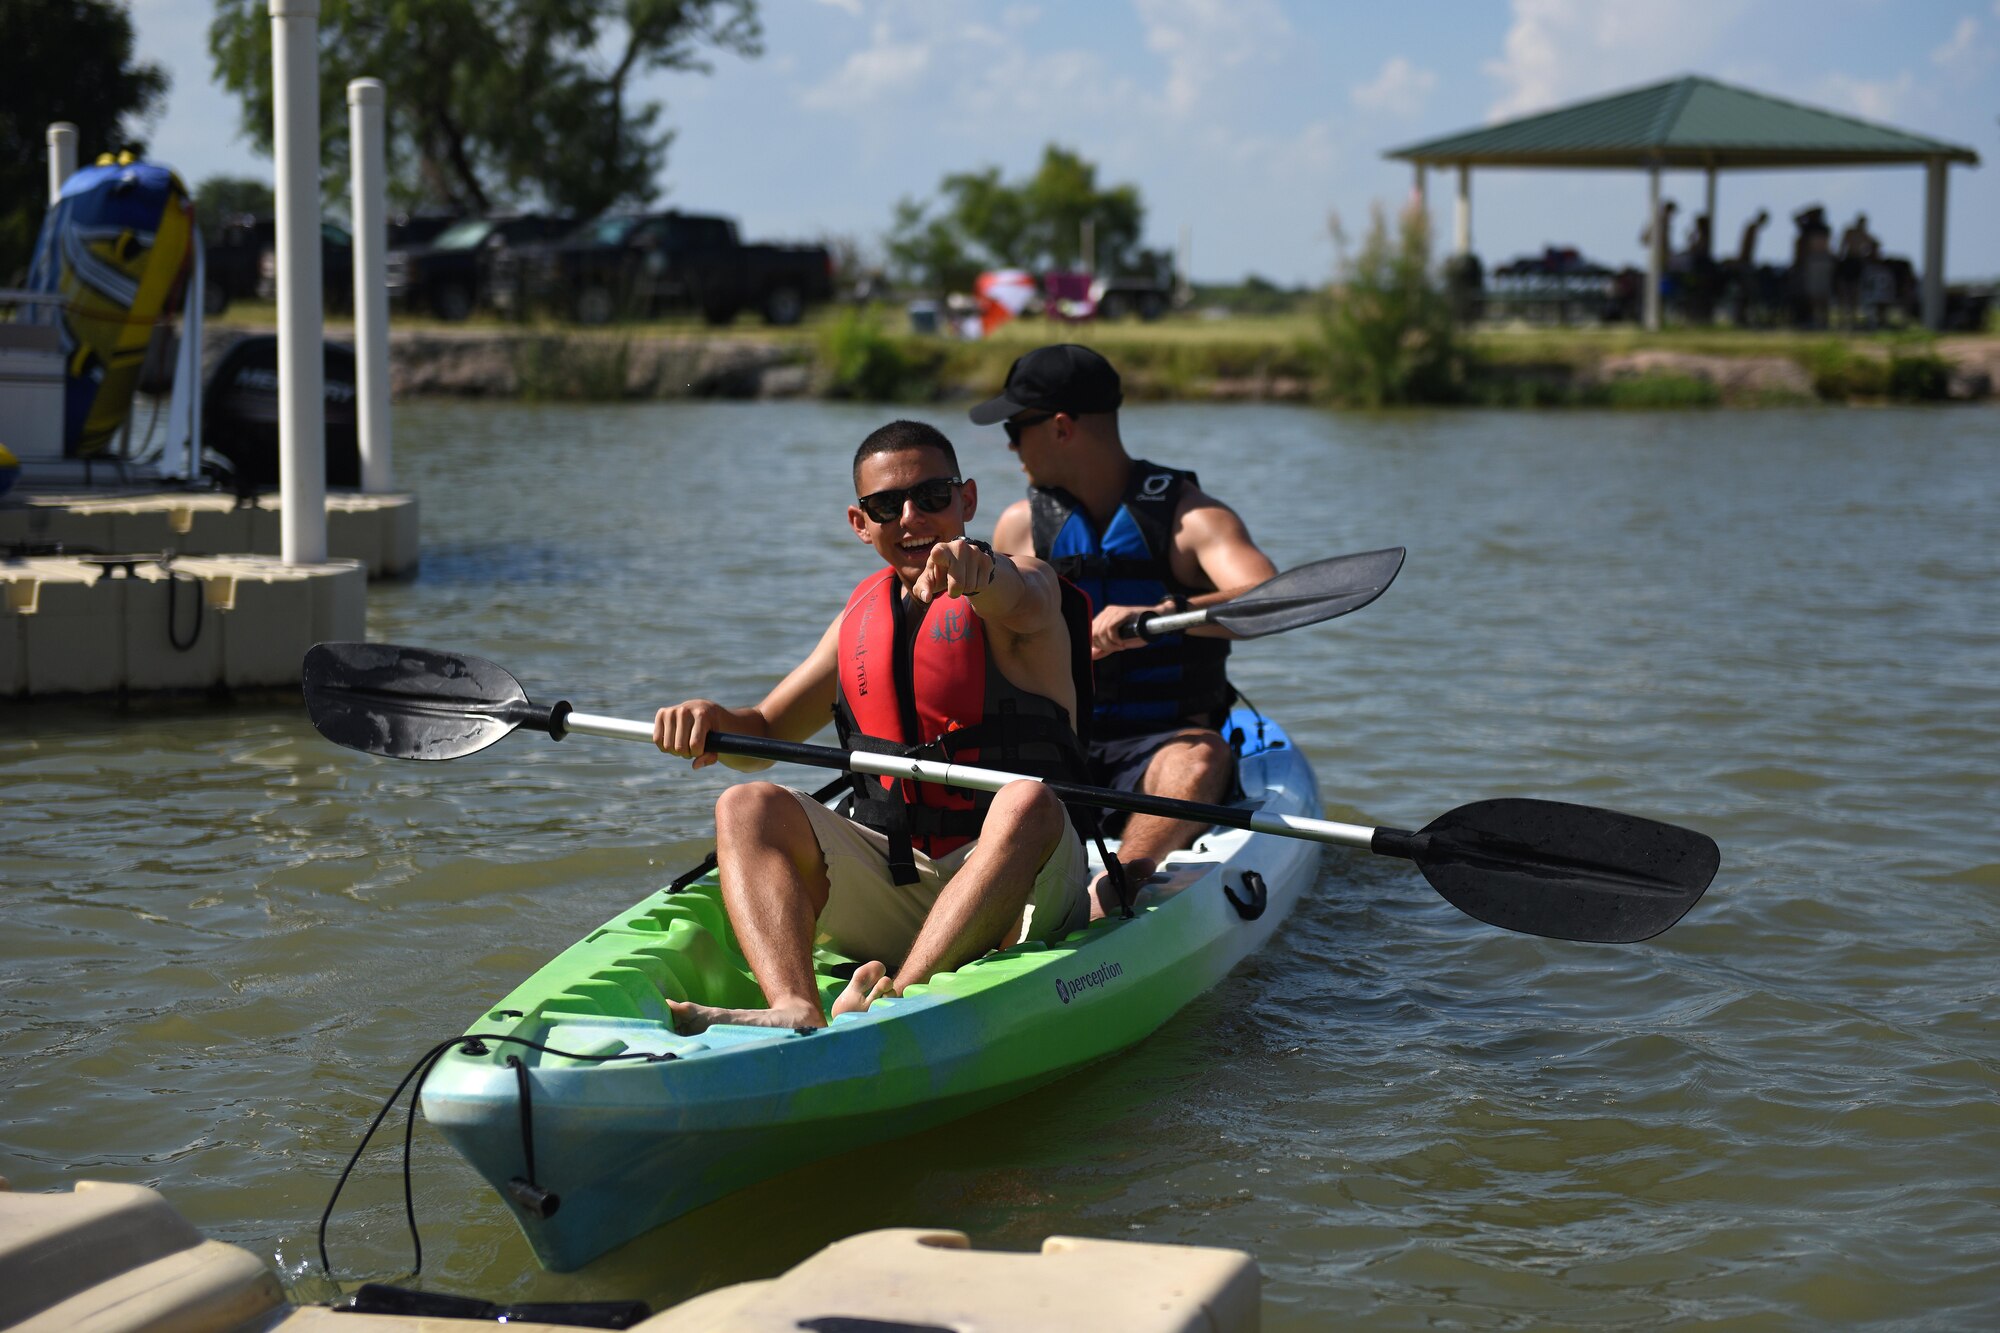 Goodfellow Air Force Base members row a kayak during the 4th of July Celebration at Goodfellow Air Force Base Recreation Camp in San Angelo, Texas, July 4, 2016. Volunteers from Goodfellow helped issue gear and kayaks to participants for their use. (U.S. Air Force photo by Airman 1st Class Caelynn Ferguson/Released)